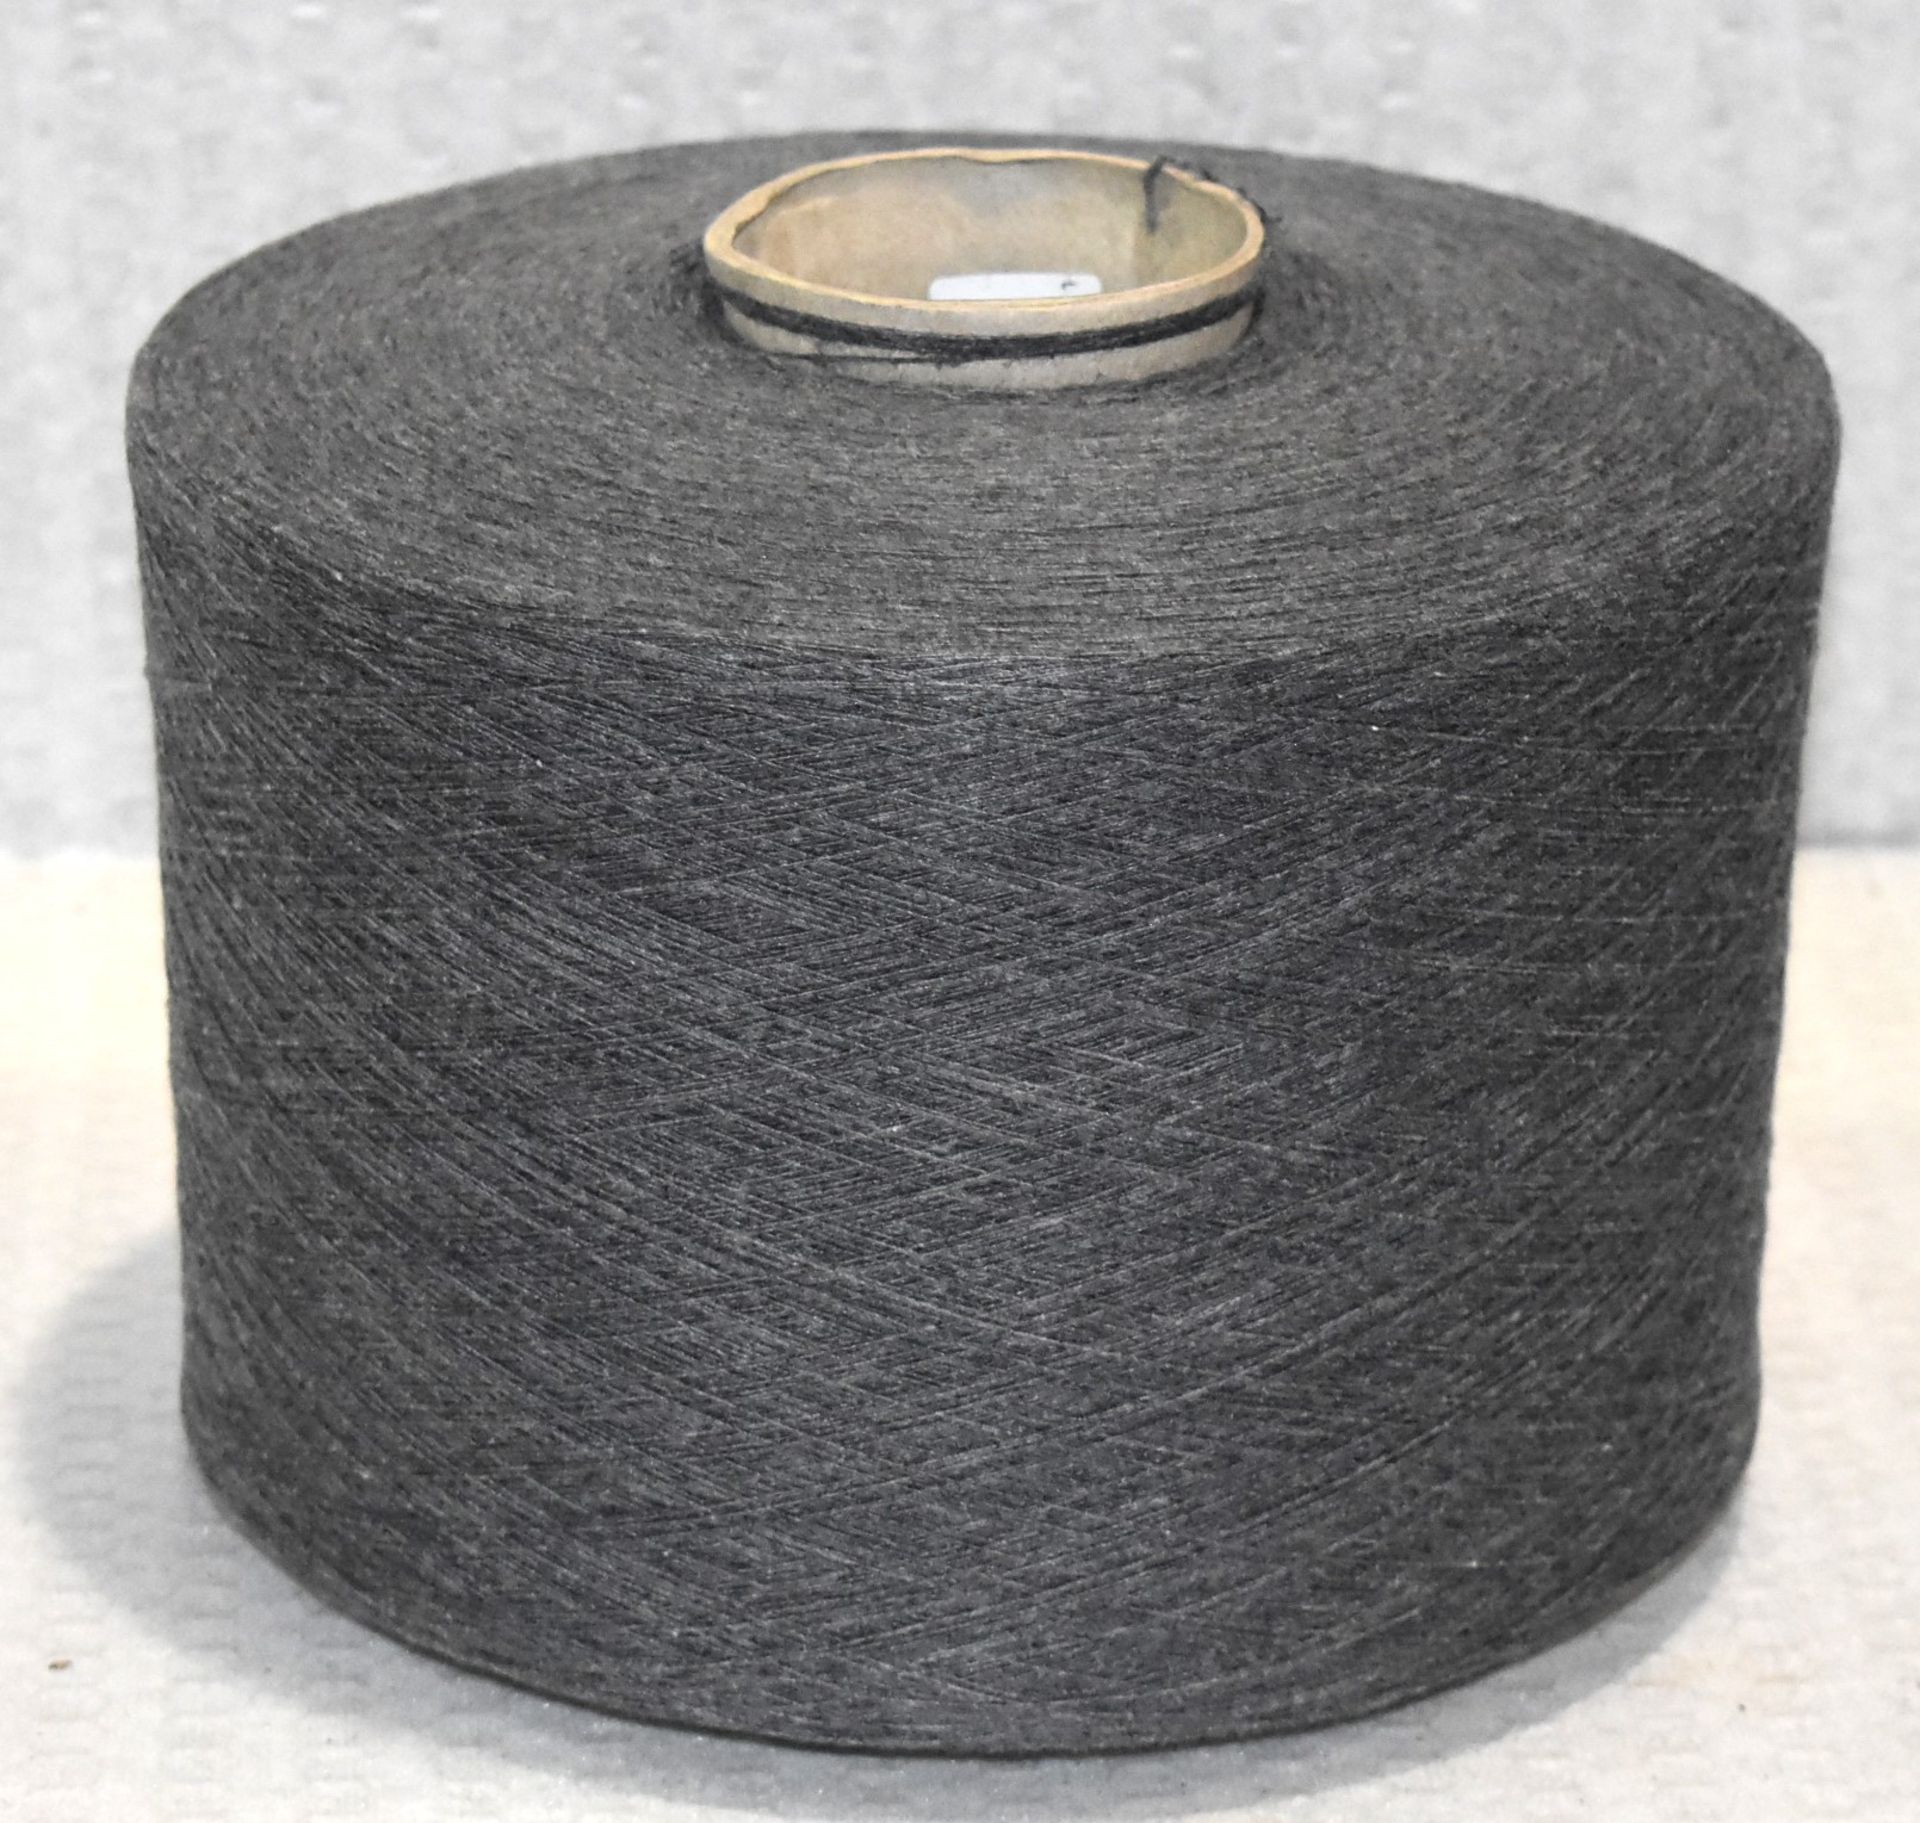 36 x Cones of 1/13 MicroCotton Knitting Yarn - Mid Grey - Approx Weight: 2,500g - New Stock ABL Yarn - Image 7 of 12